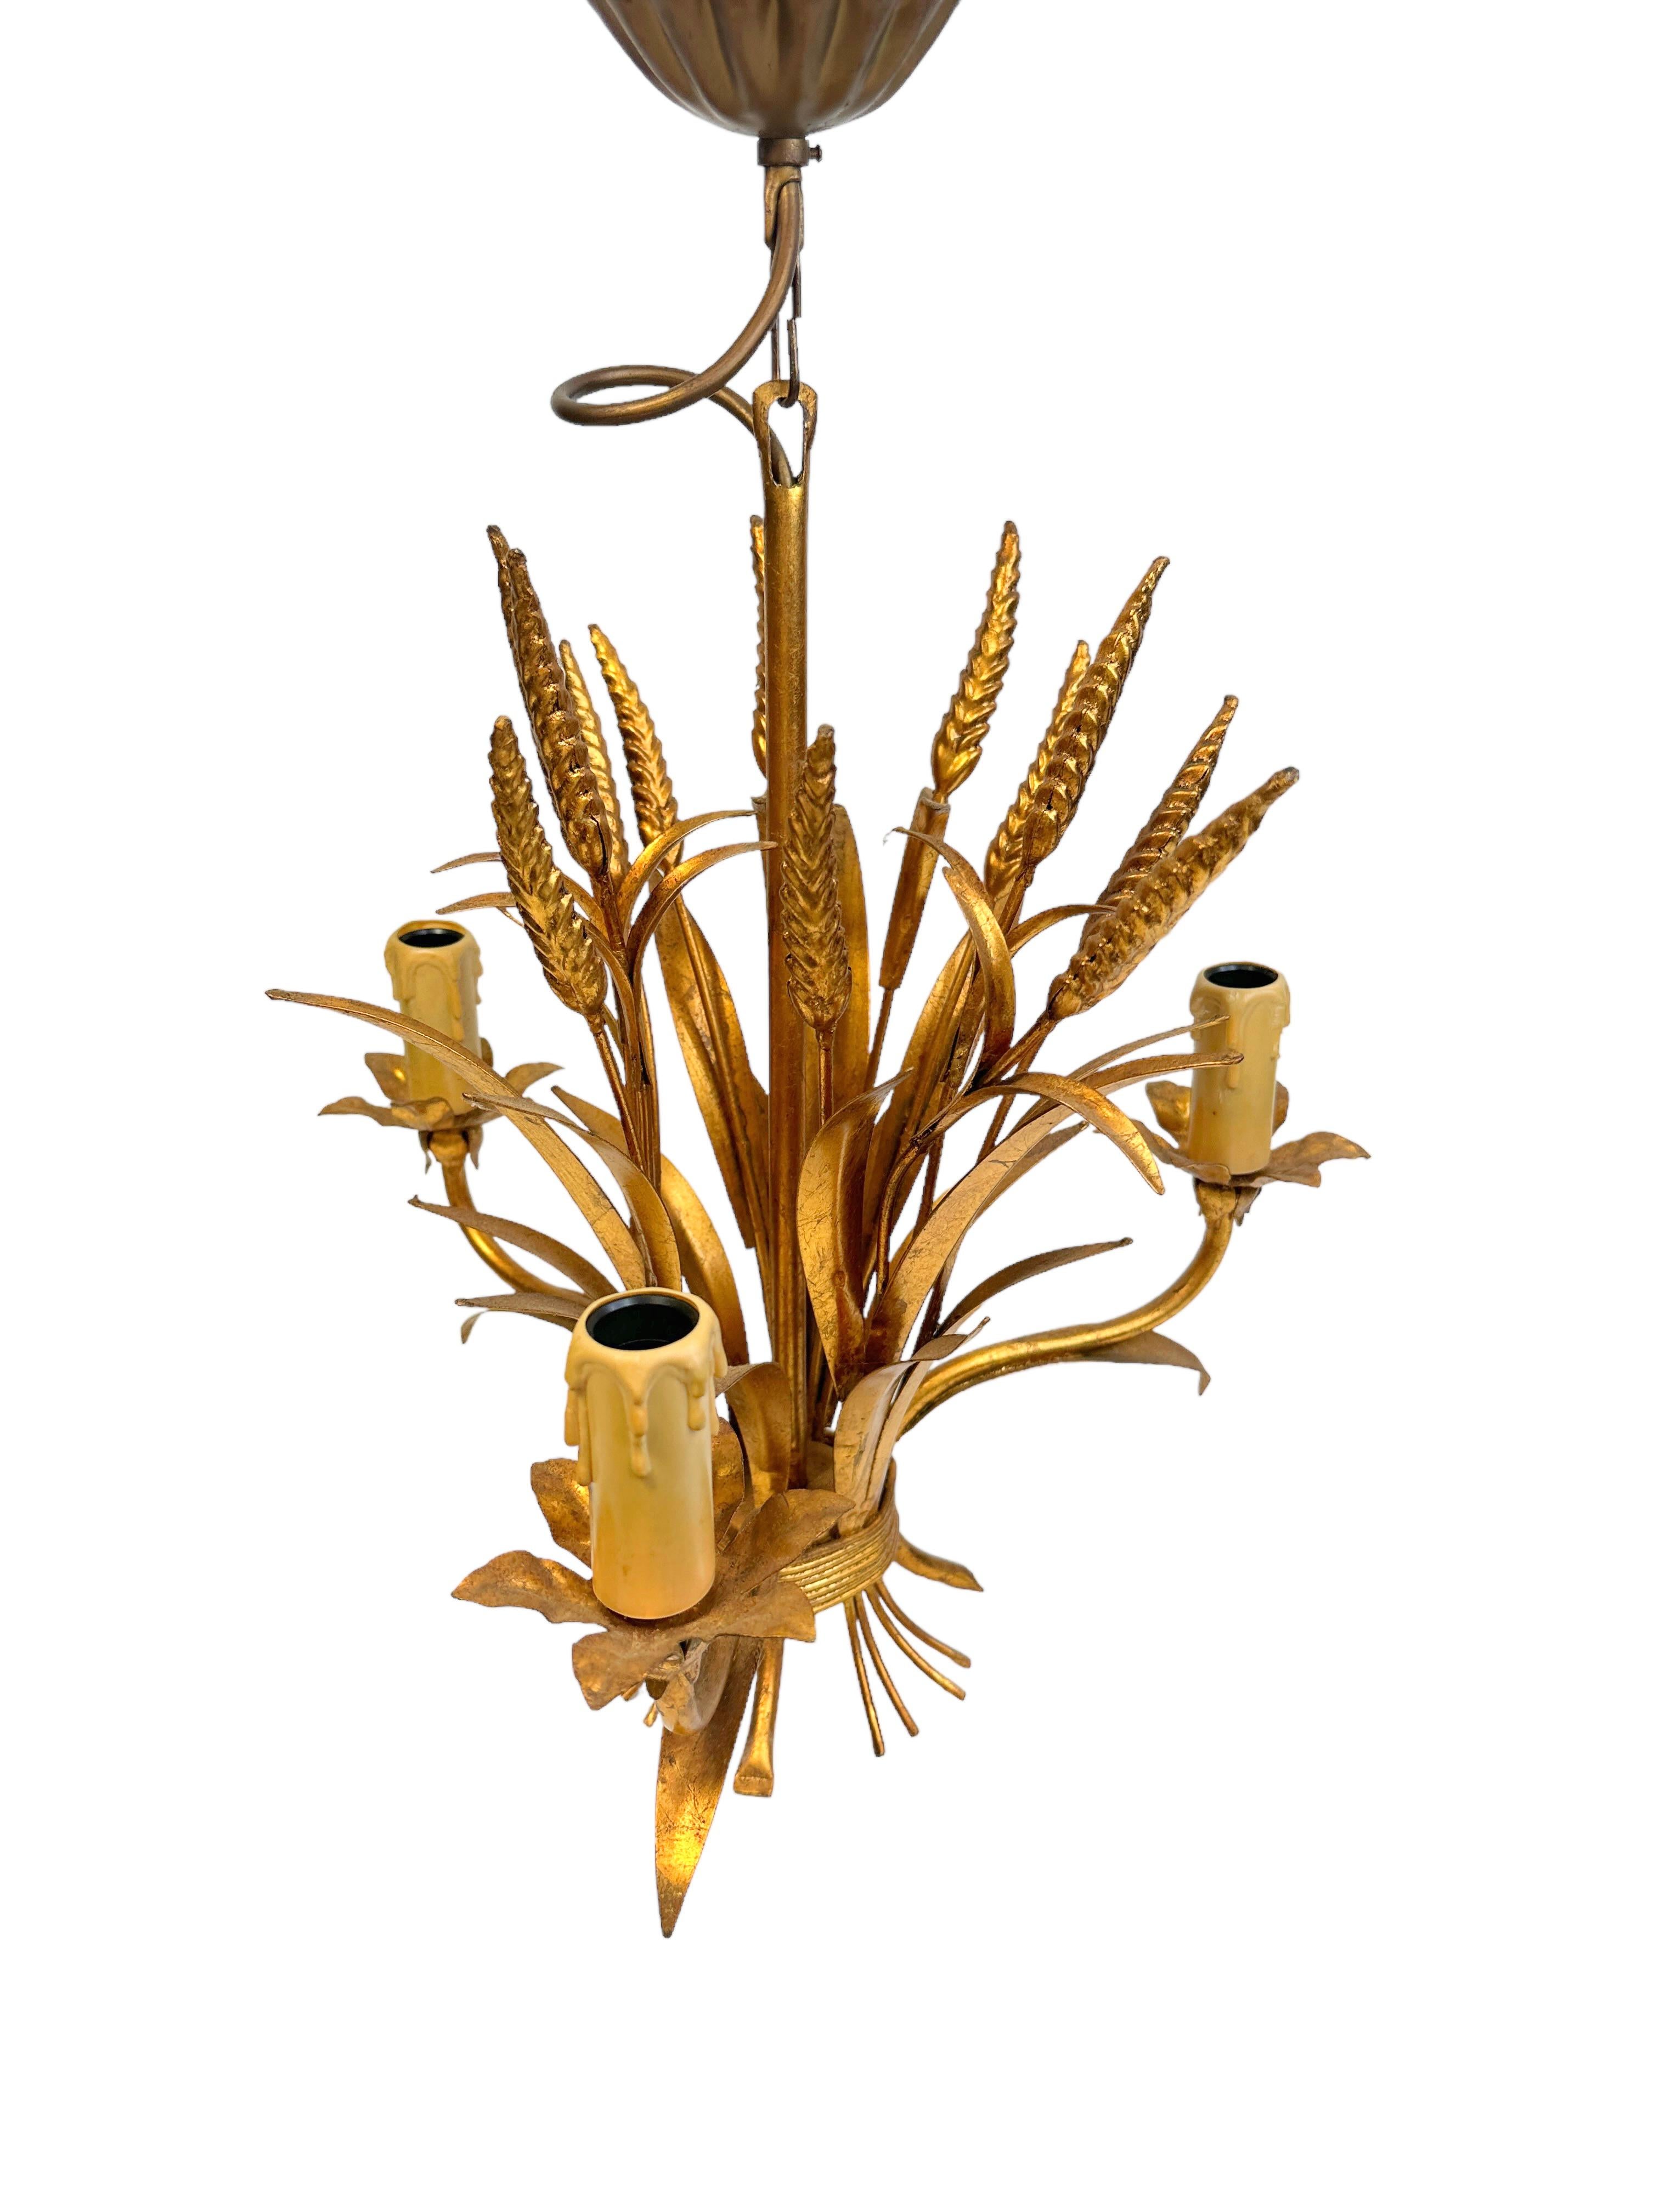 Mid-20th Century 3-Light Gilt Metal Wheat Sheaf Chandelier Koegl Tole Toleware Coco Chanel Style For Sale